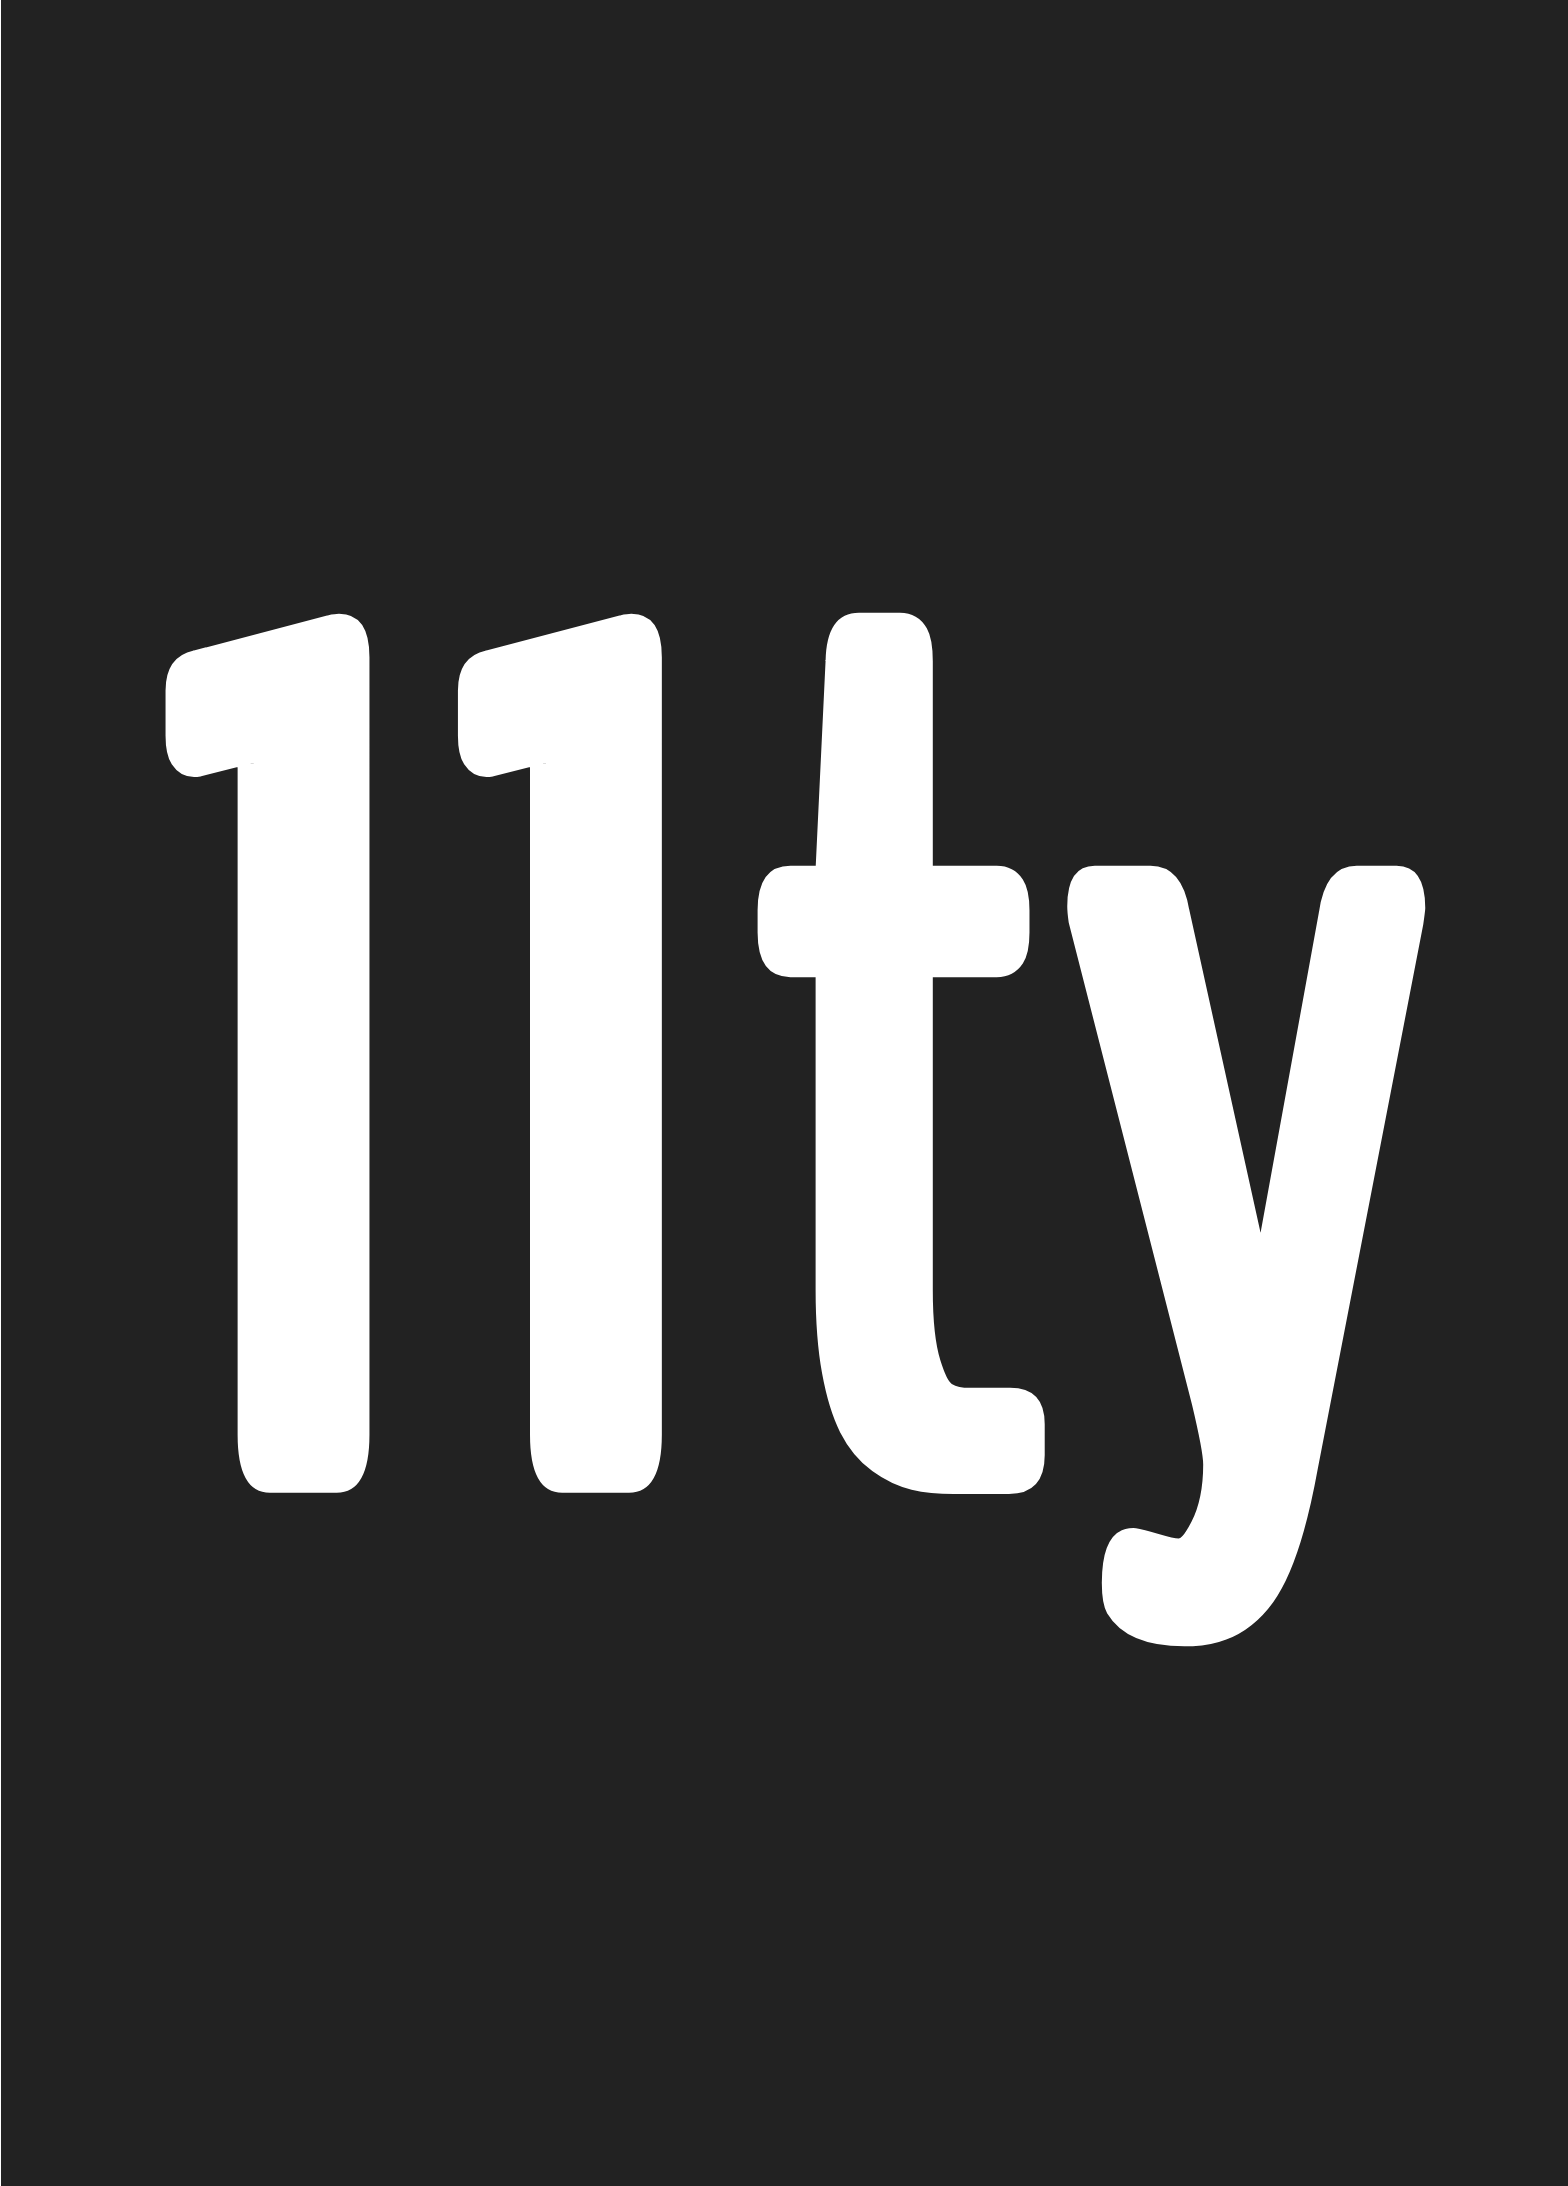 11ty-logo.png